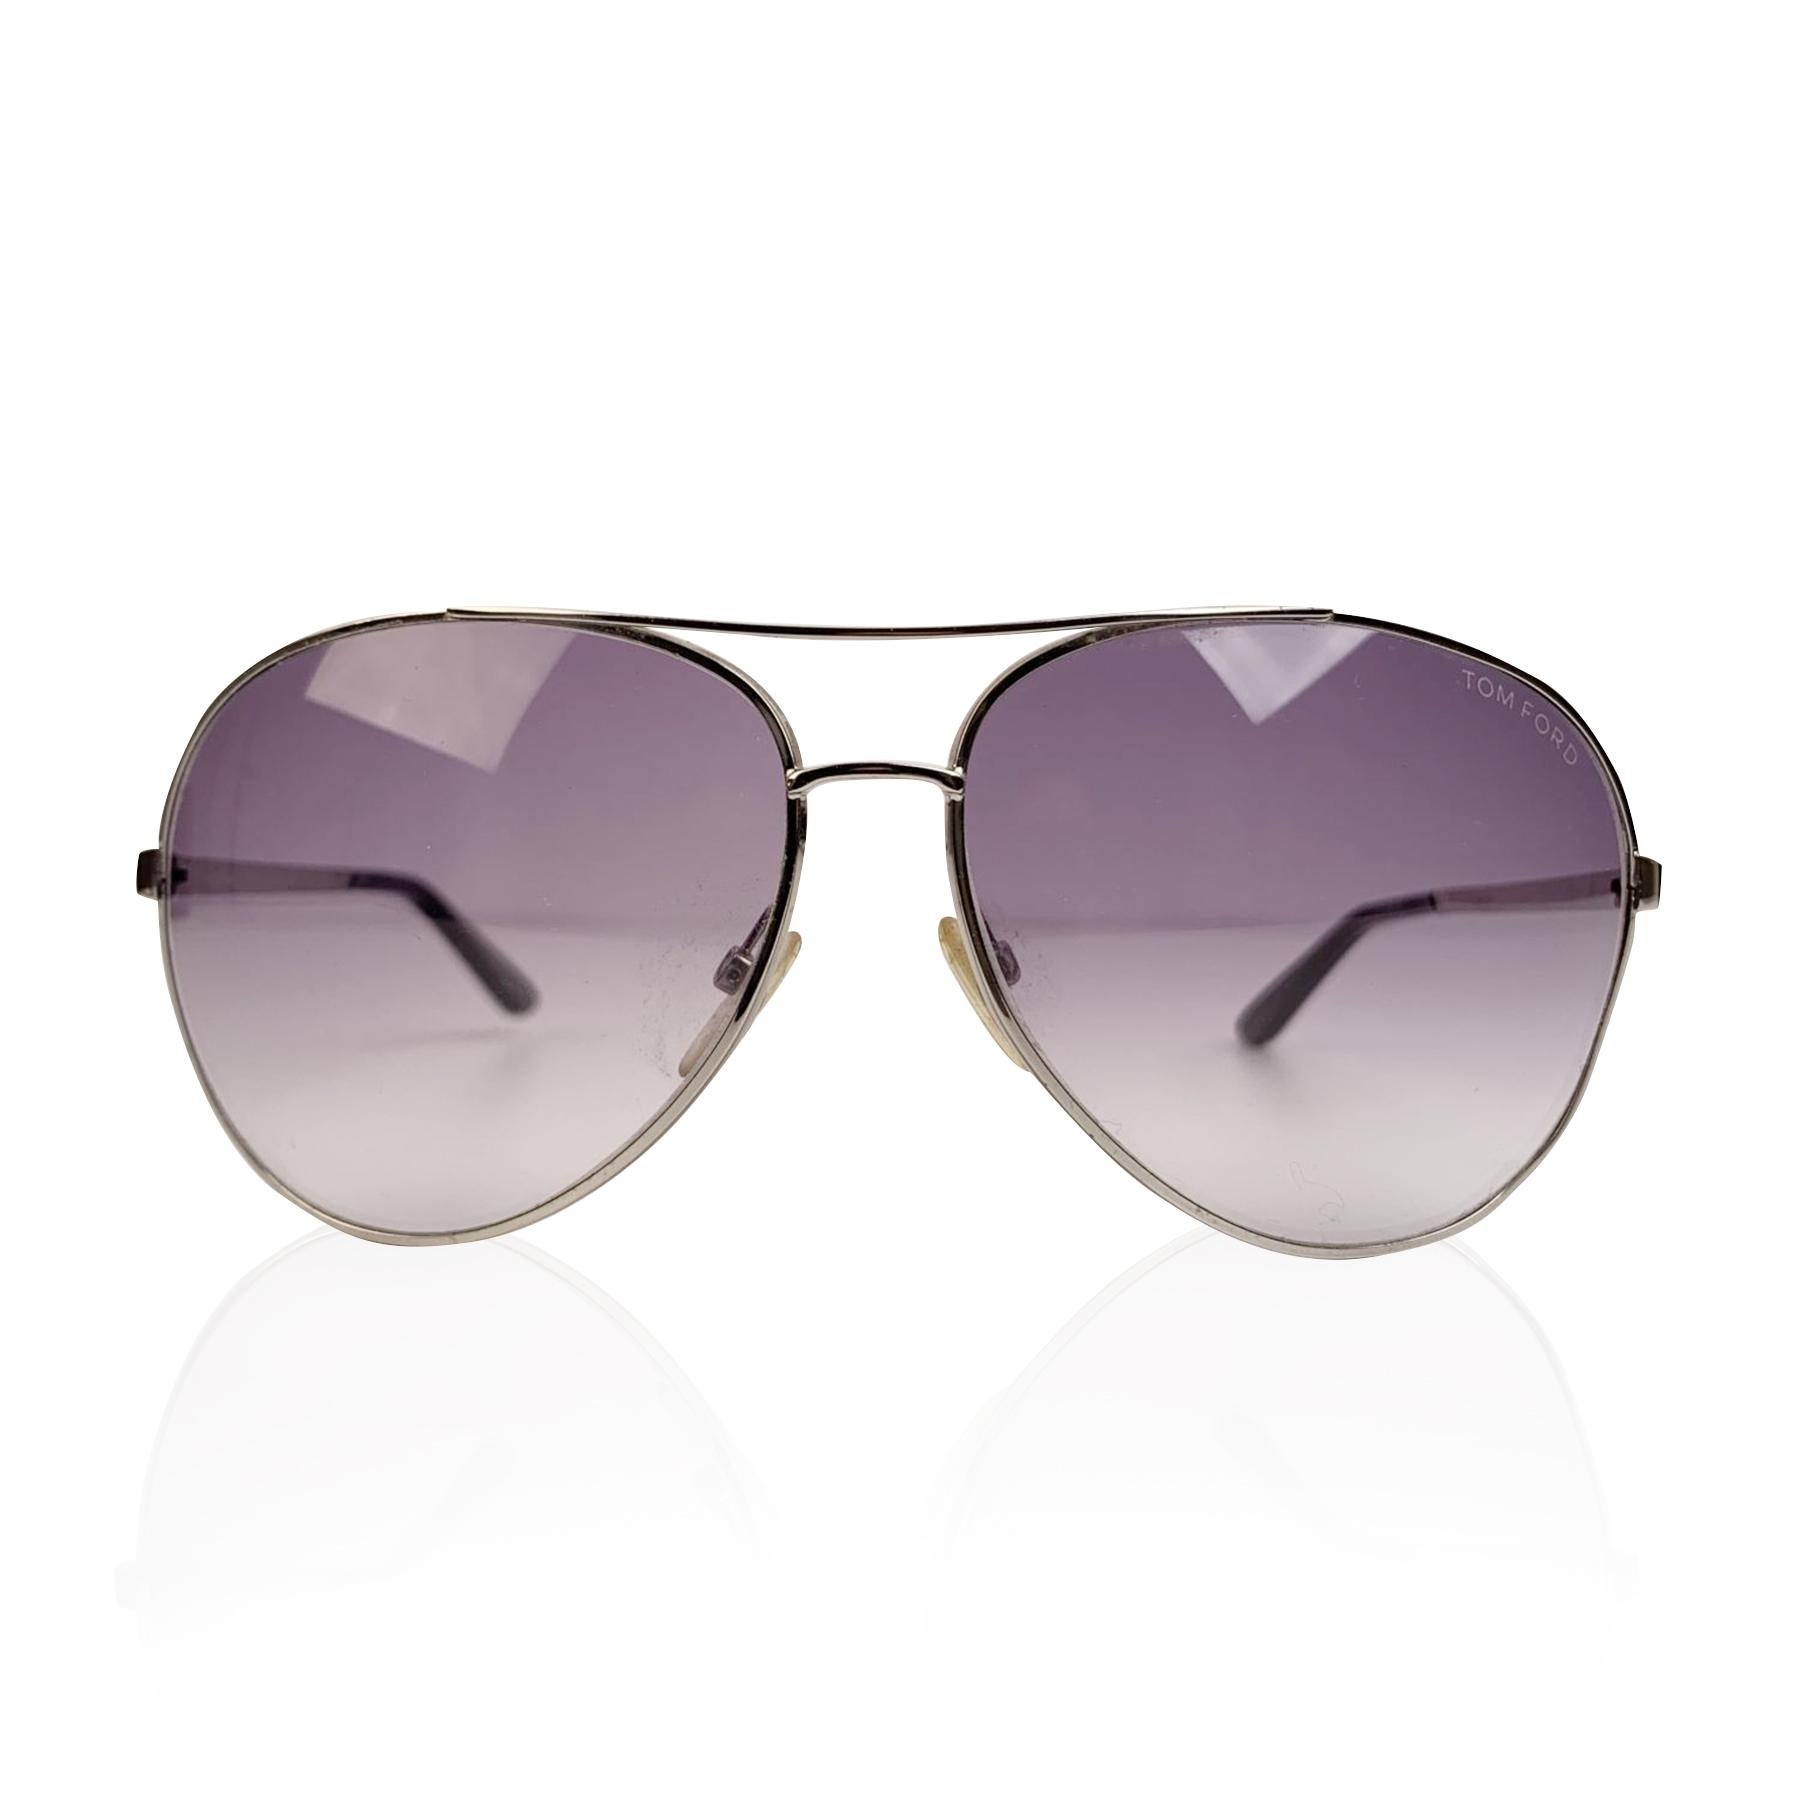 - Charles TF 35 - 753 sunglasses by Tom Ford
- Silver metal aviator frame
- Gradient 100% UV protection lenses
- Made in Italy
- Serial & ref. numbers printed internally
- OrigInal TOM FORD box and hardcase are included





Details

MATERIAL: